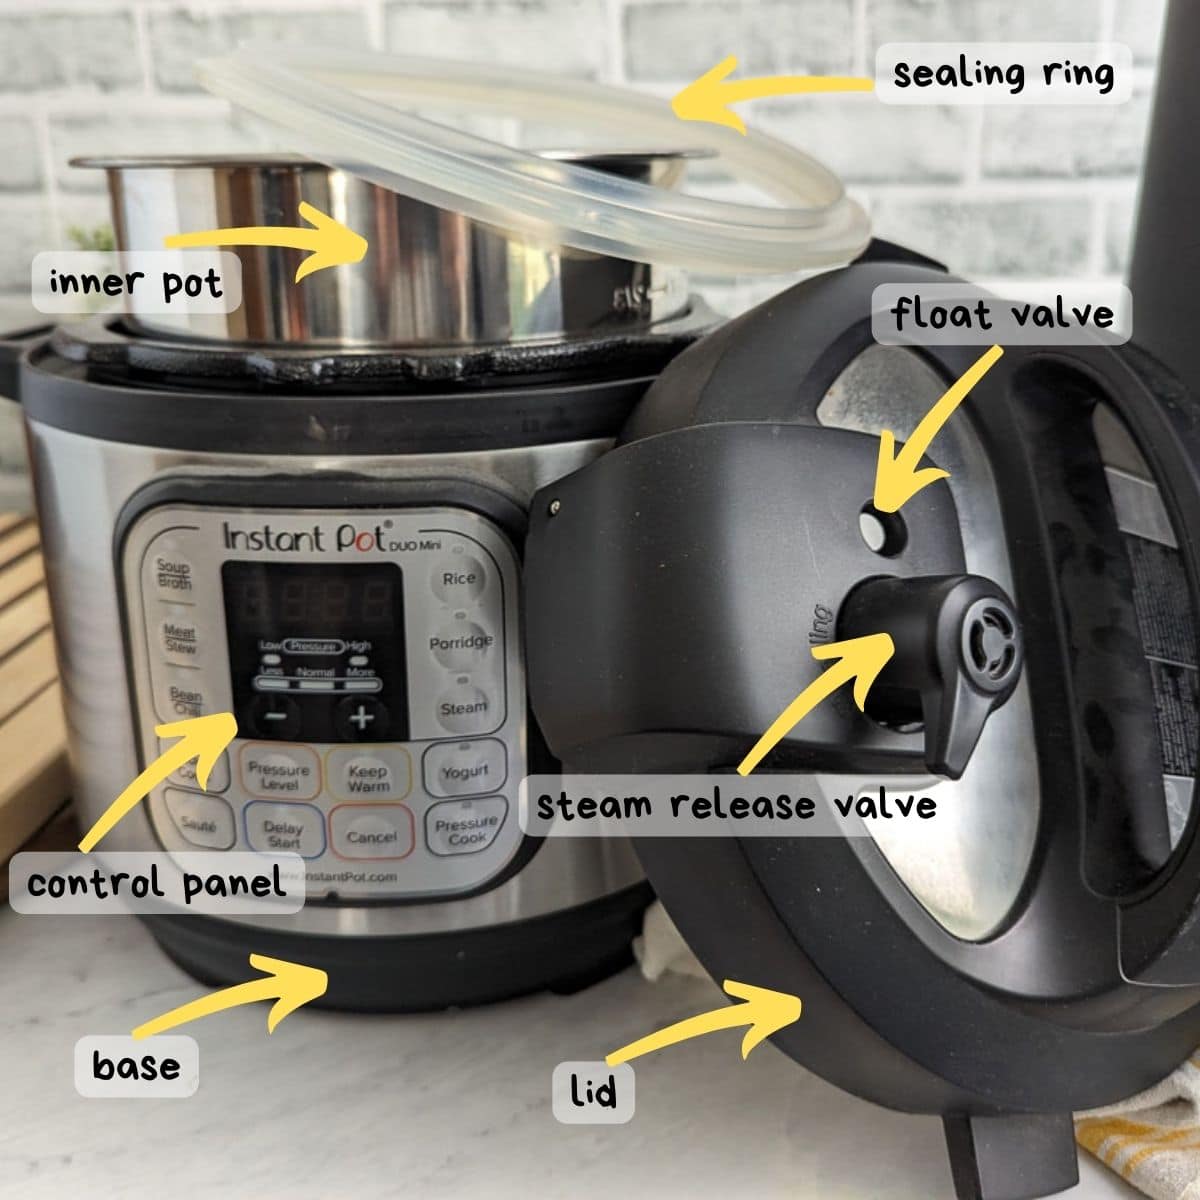 Labeled parts of an Instant Pot Duo in the image: control panel, base, inner pot, lid, sealing ring, float valve, and steam release valve.